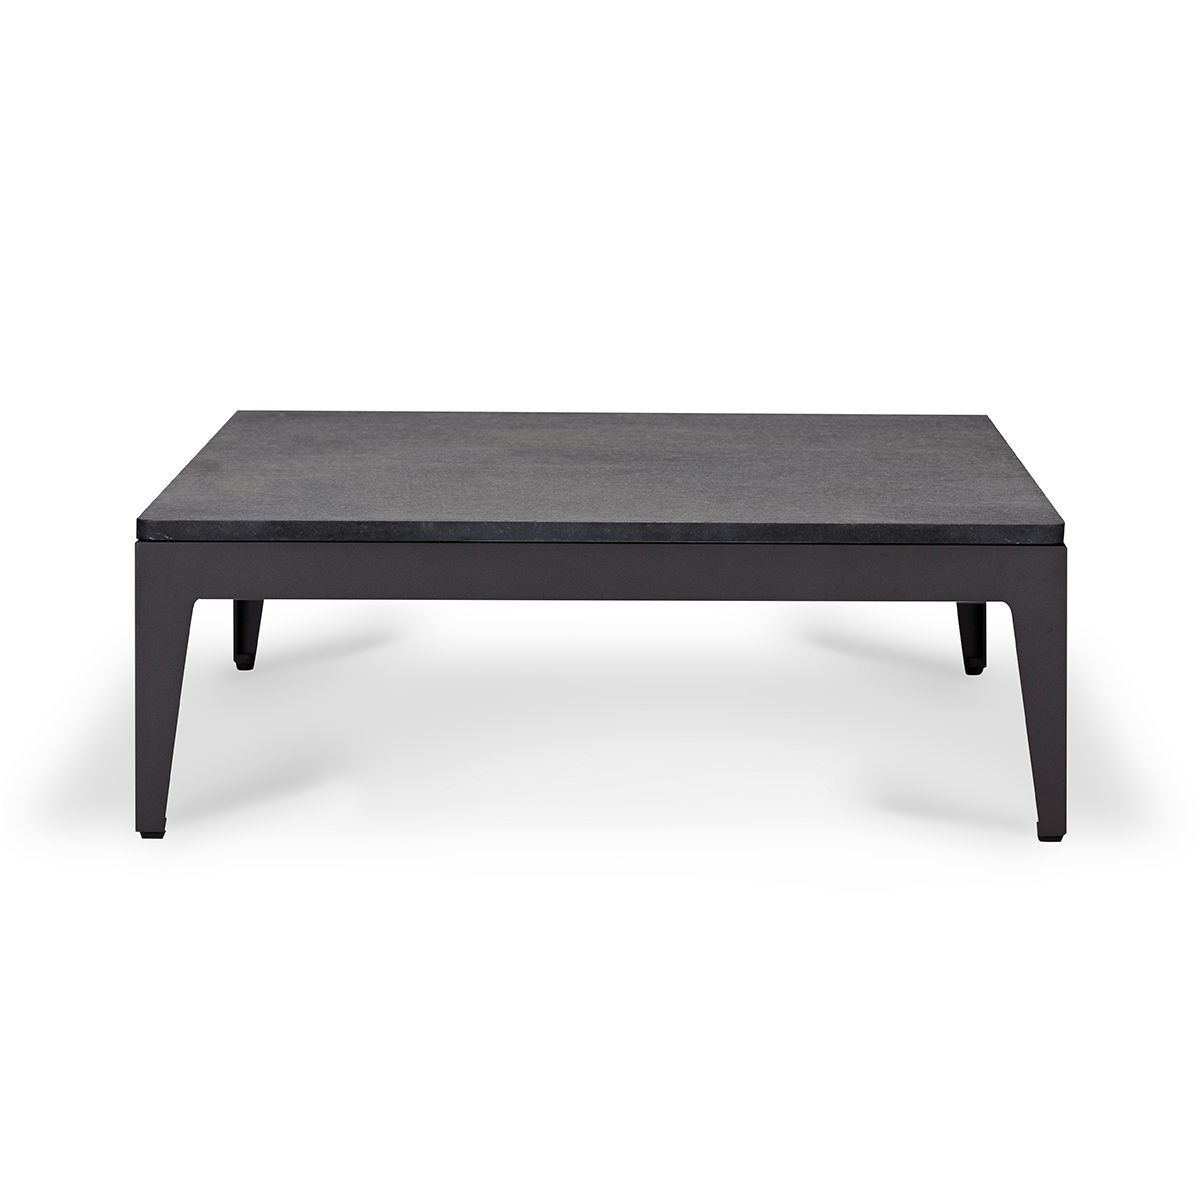 BALMORAL COFFEE TABLE - Aluminum - Asteroid Powder Coated, Glass Matte Etched - White